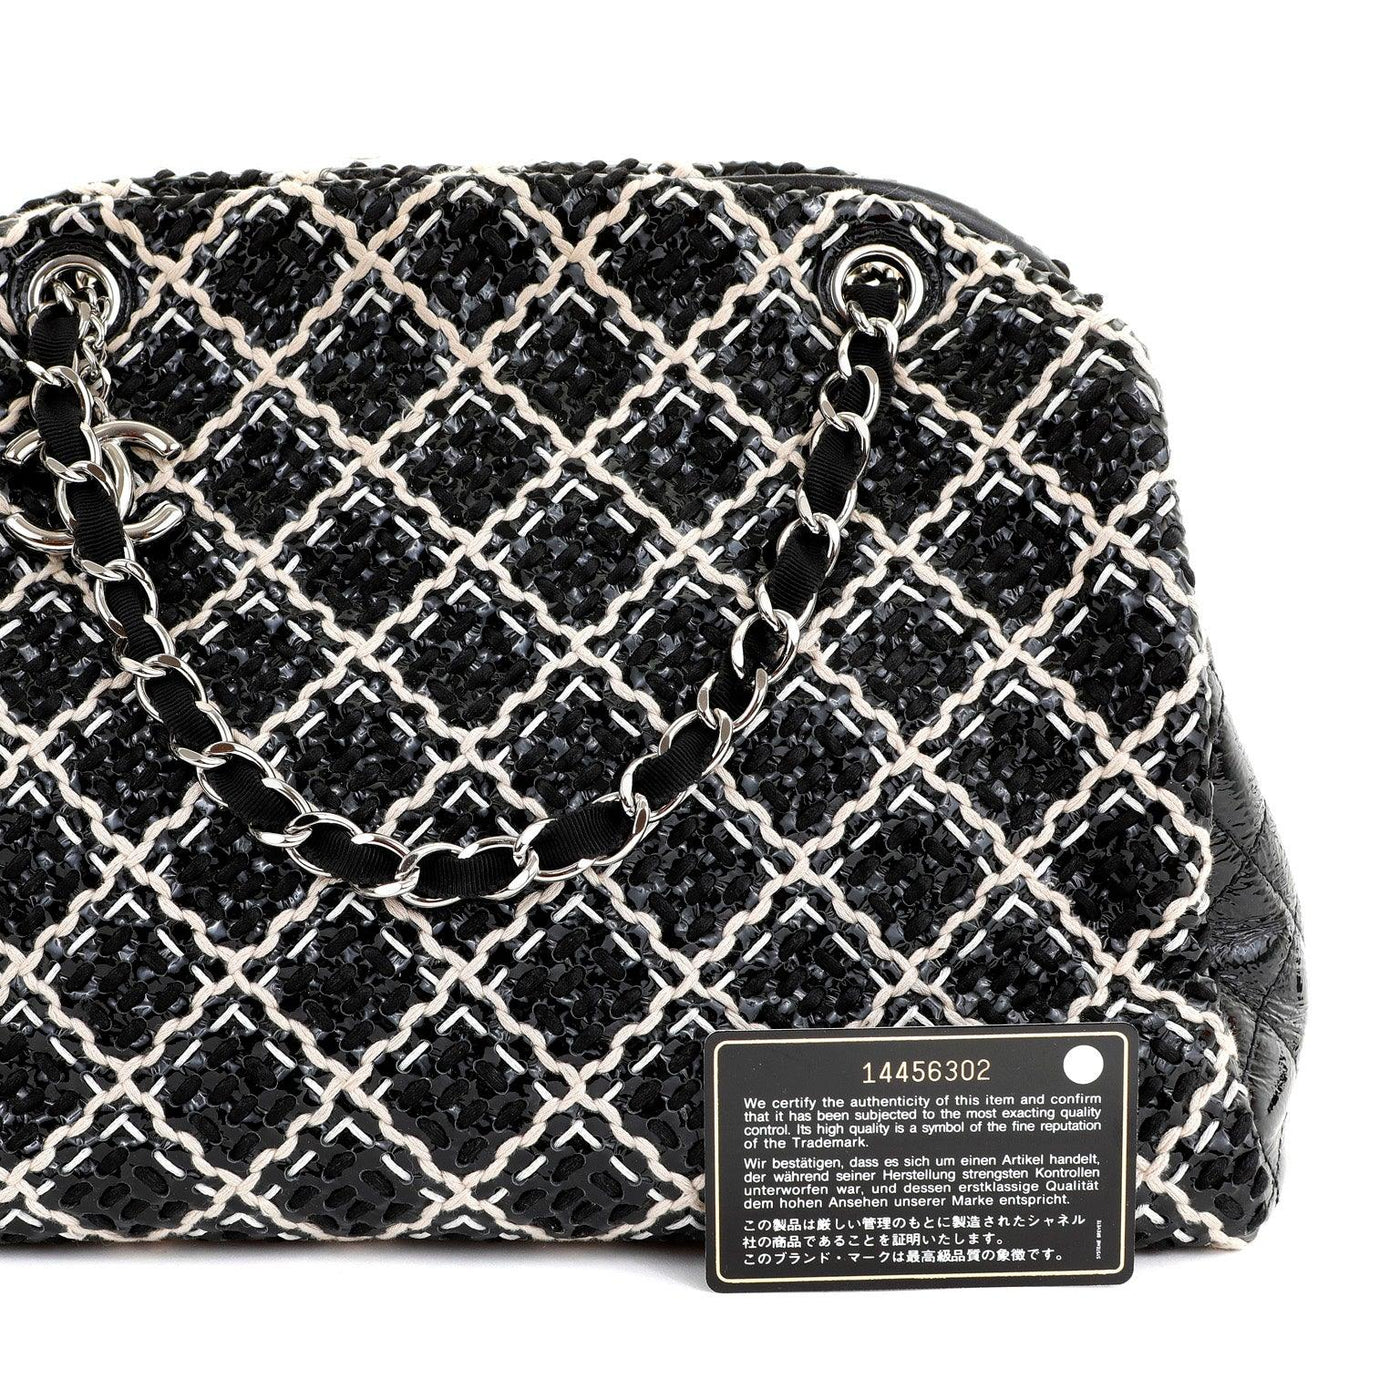 Chanel Black and Beige Tweed Patent Leather Large Just Mademoiselle Bag - Only Authentics